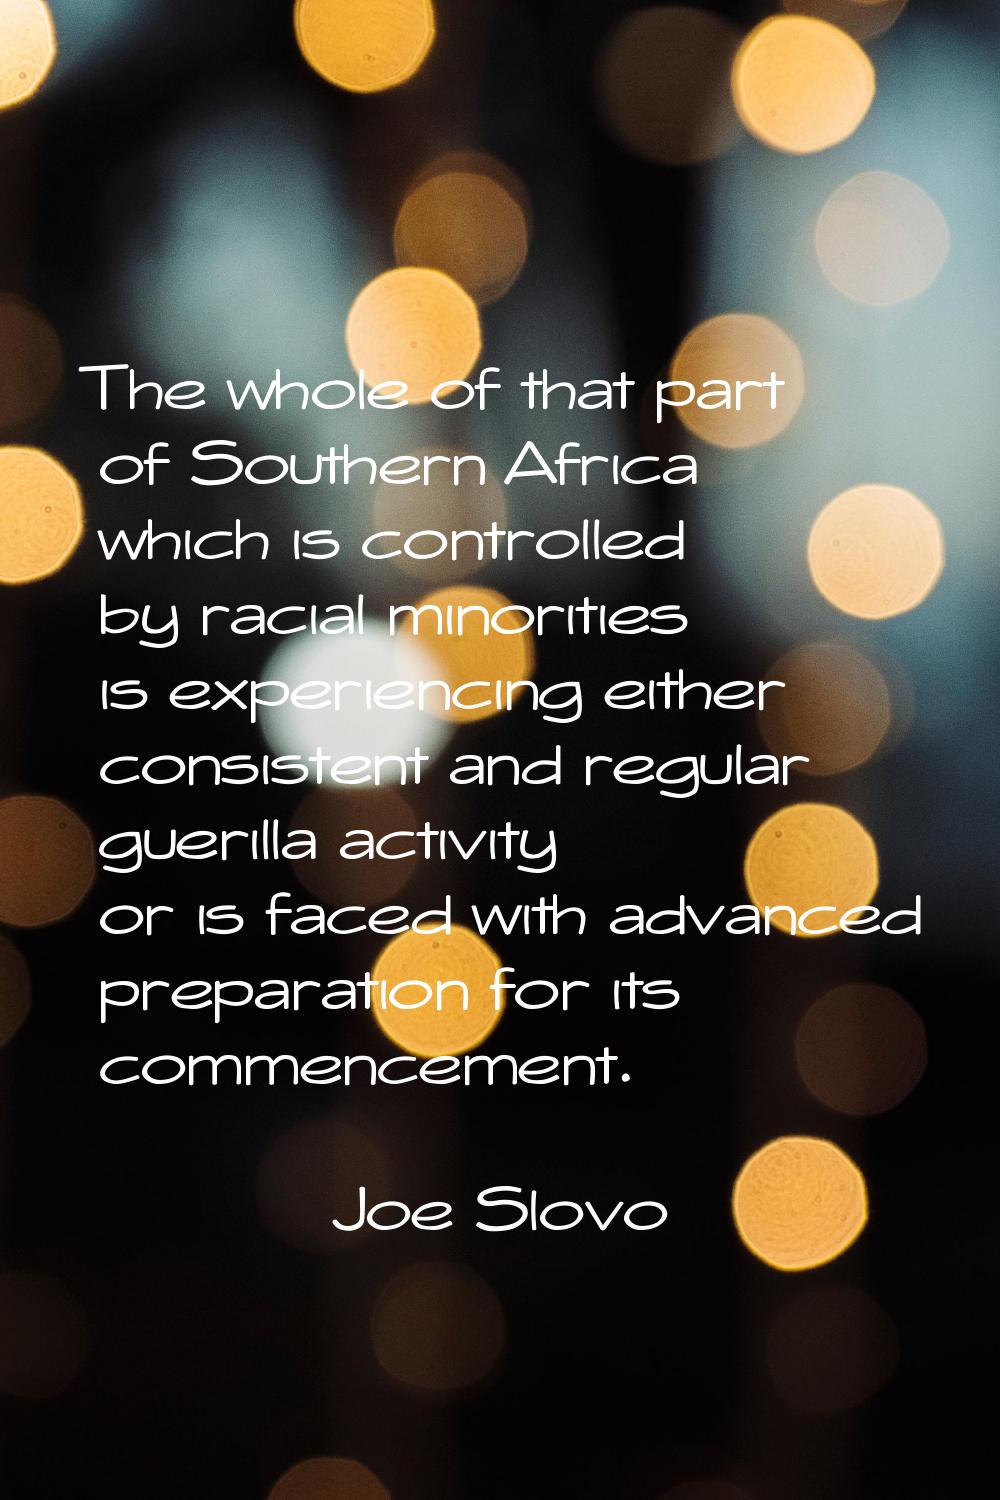 The whole of that part of Southern Africa which is controlled by racial minorities is experiencing 